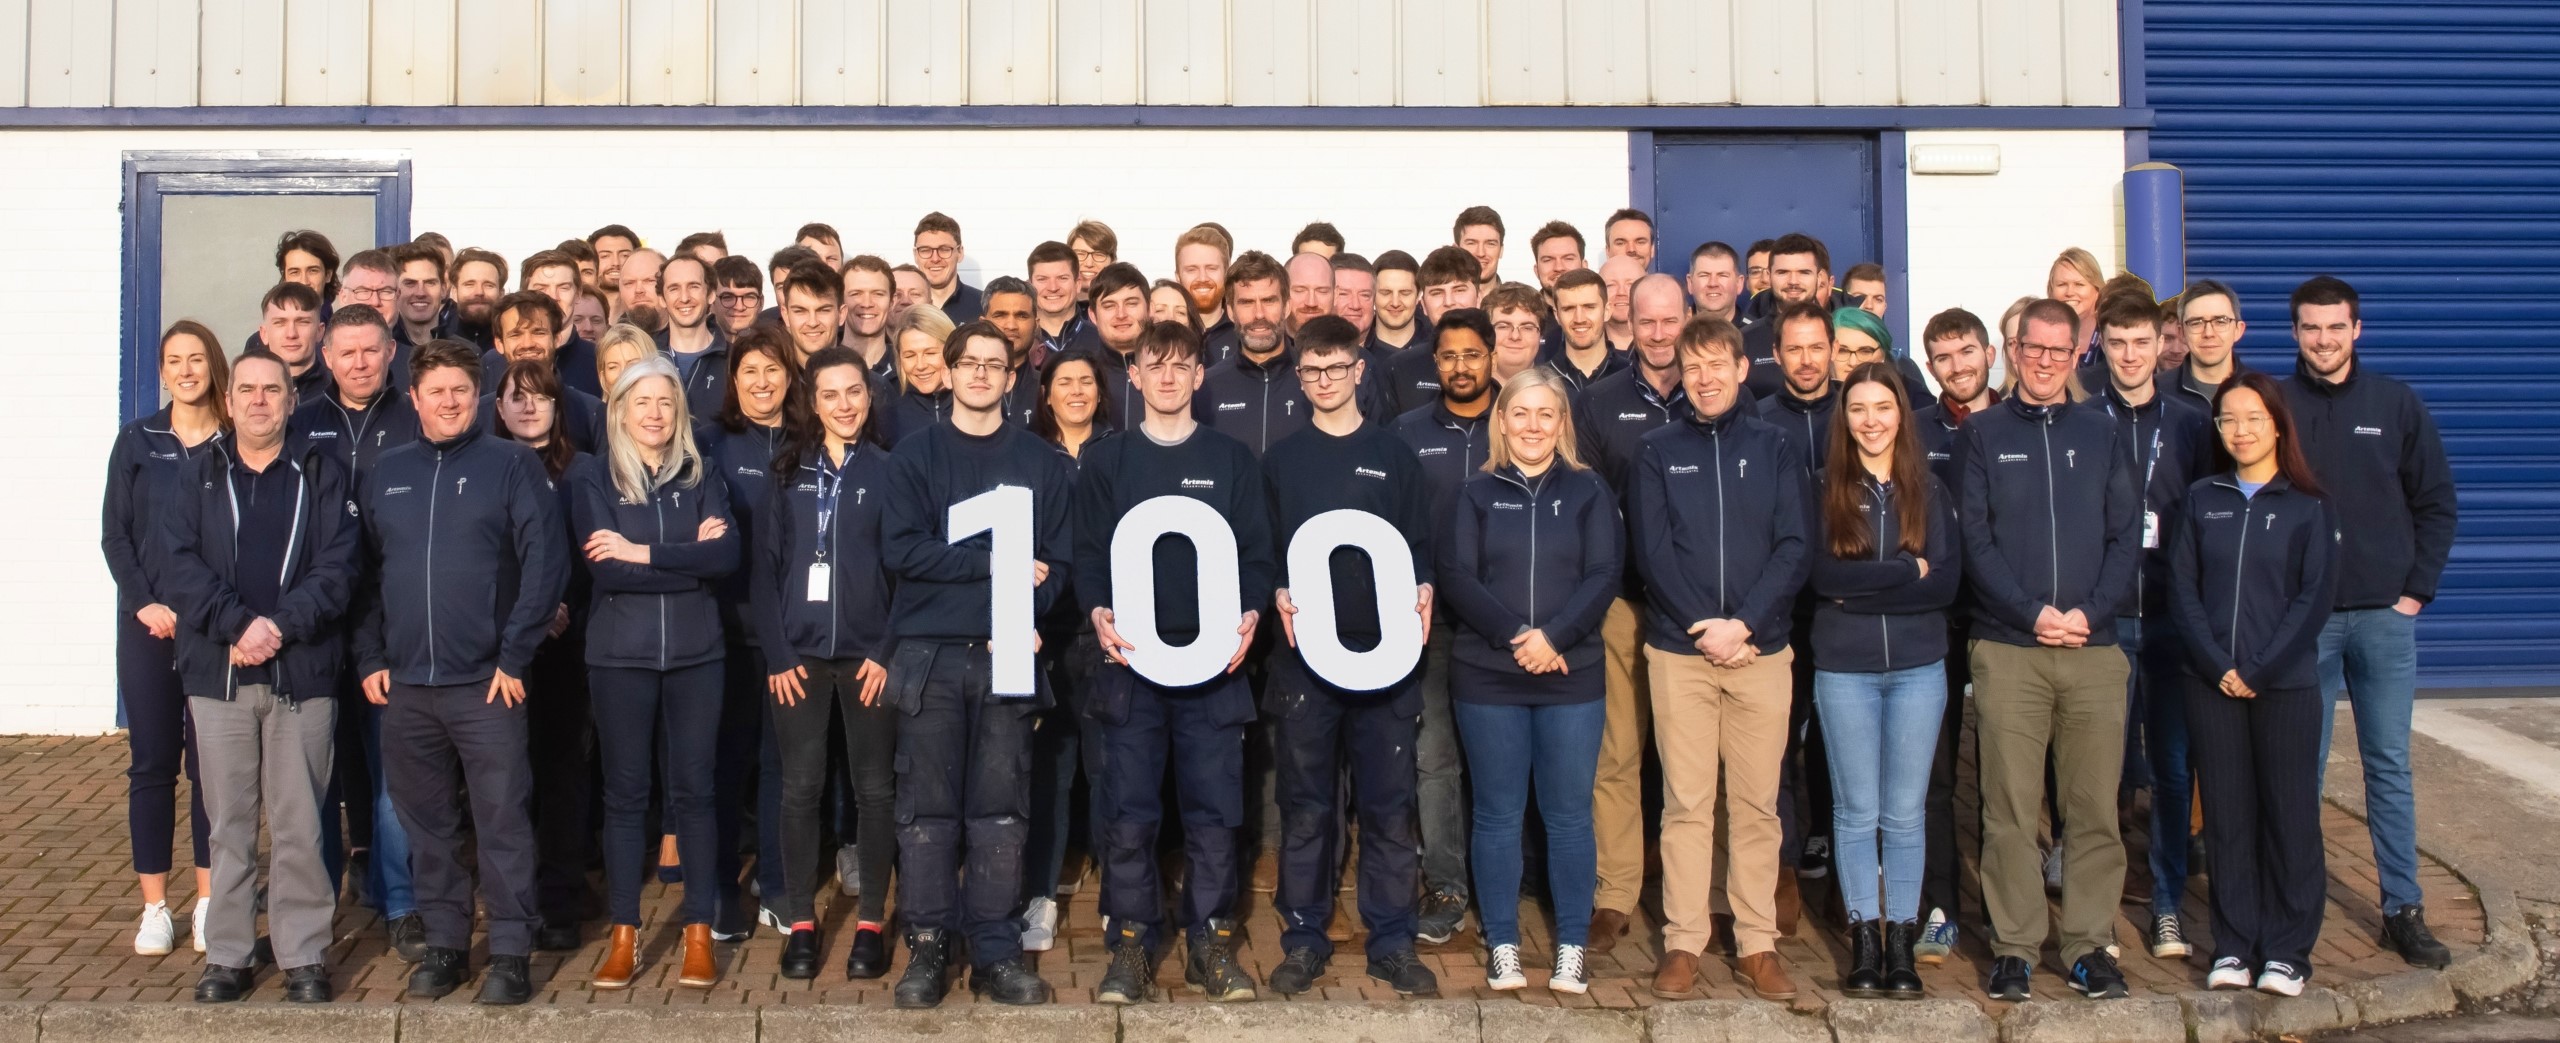 Group shot of 100 employees holding 100 sign outside of Artemis Technologies' Manufacturing facility